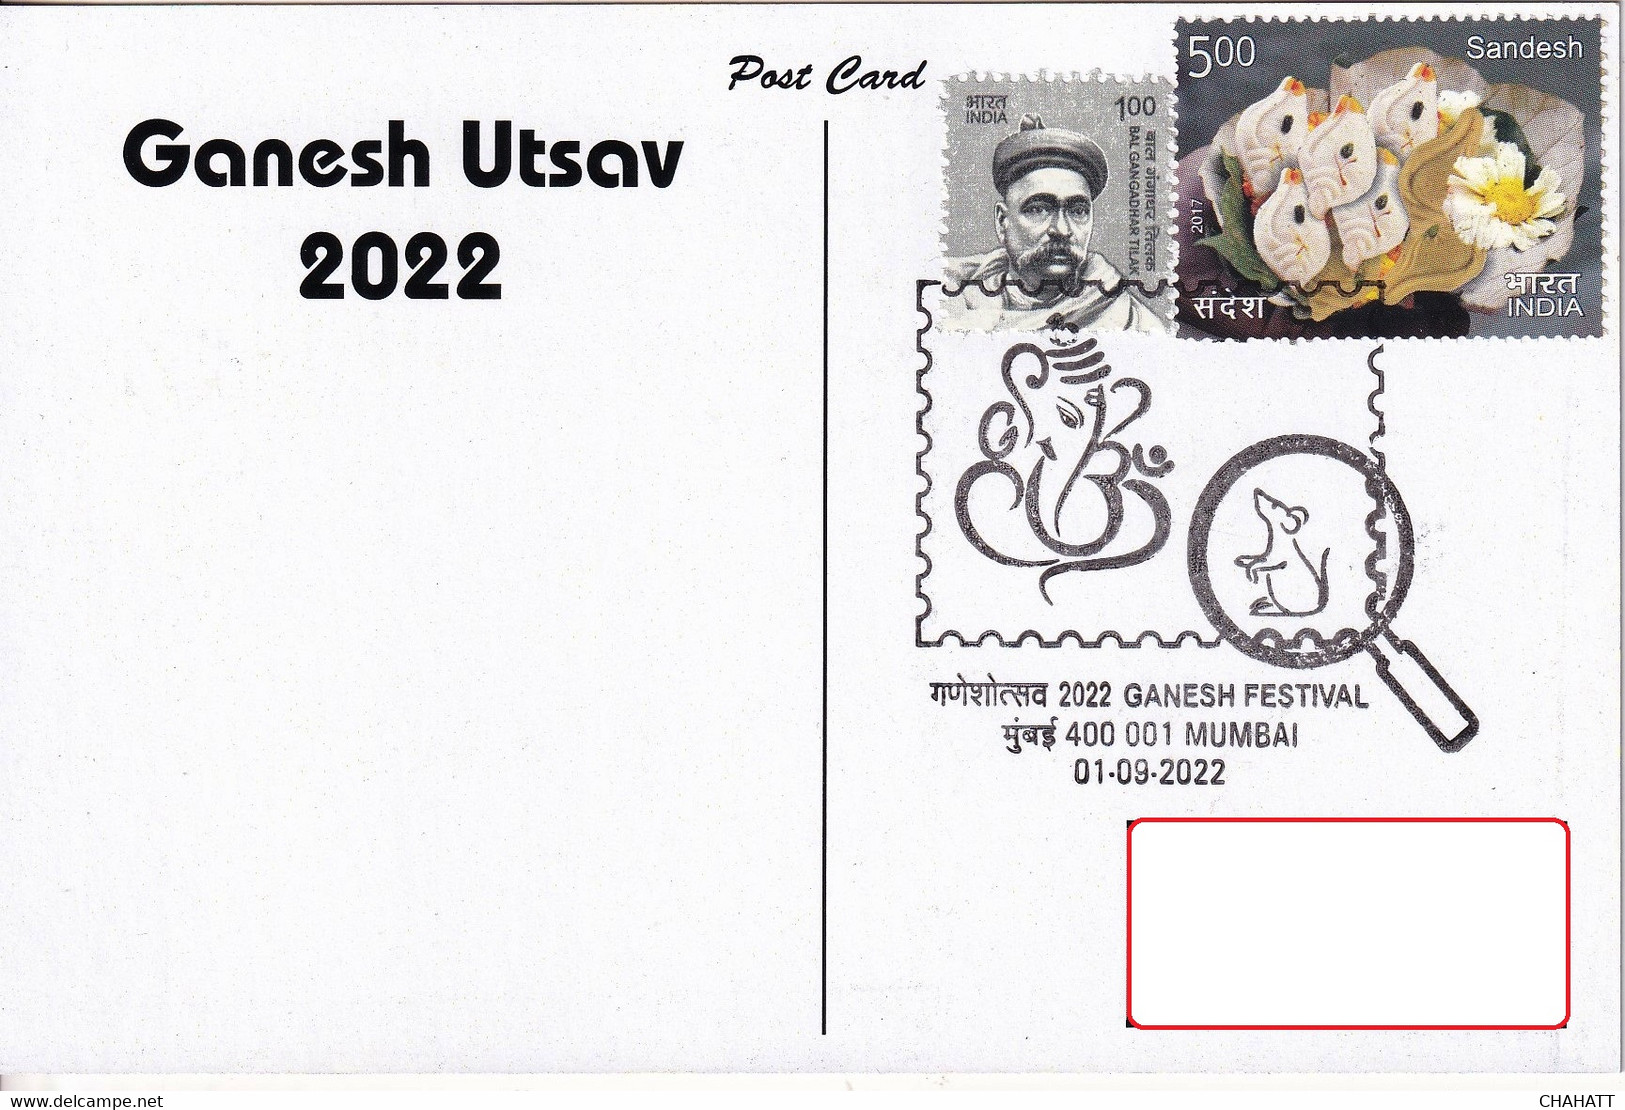 HINDUISM - LORD GANESHA - FESTIVAL -PPC WITH PICTORIAL CANCEL -#6 OF 15 -INDIA-2022- NMC2-35 - Hindouisme